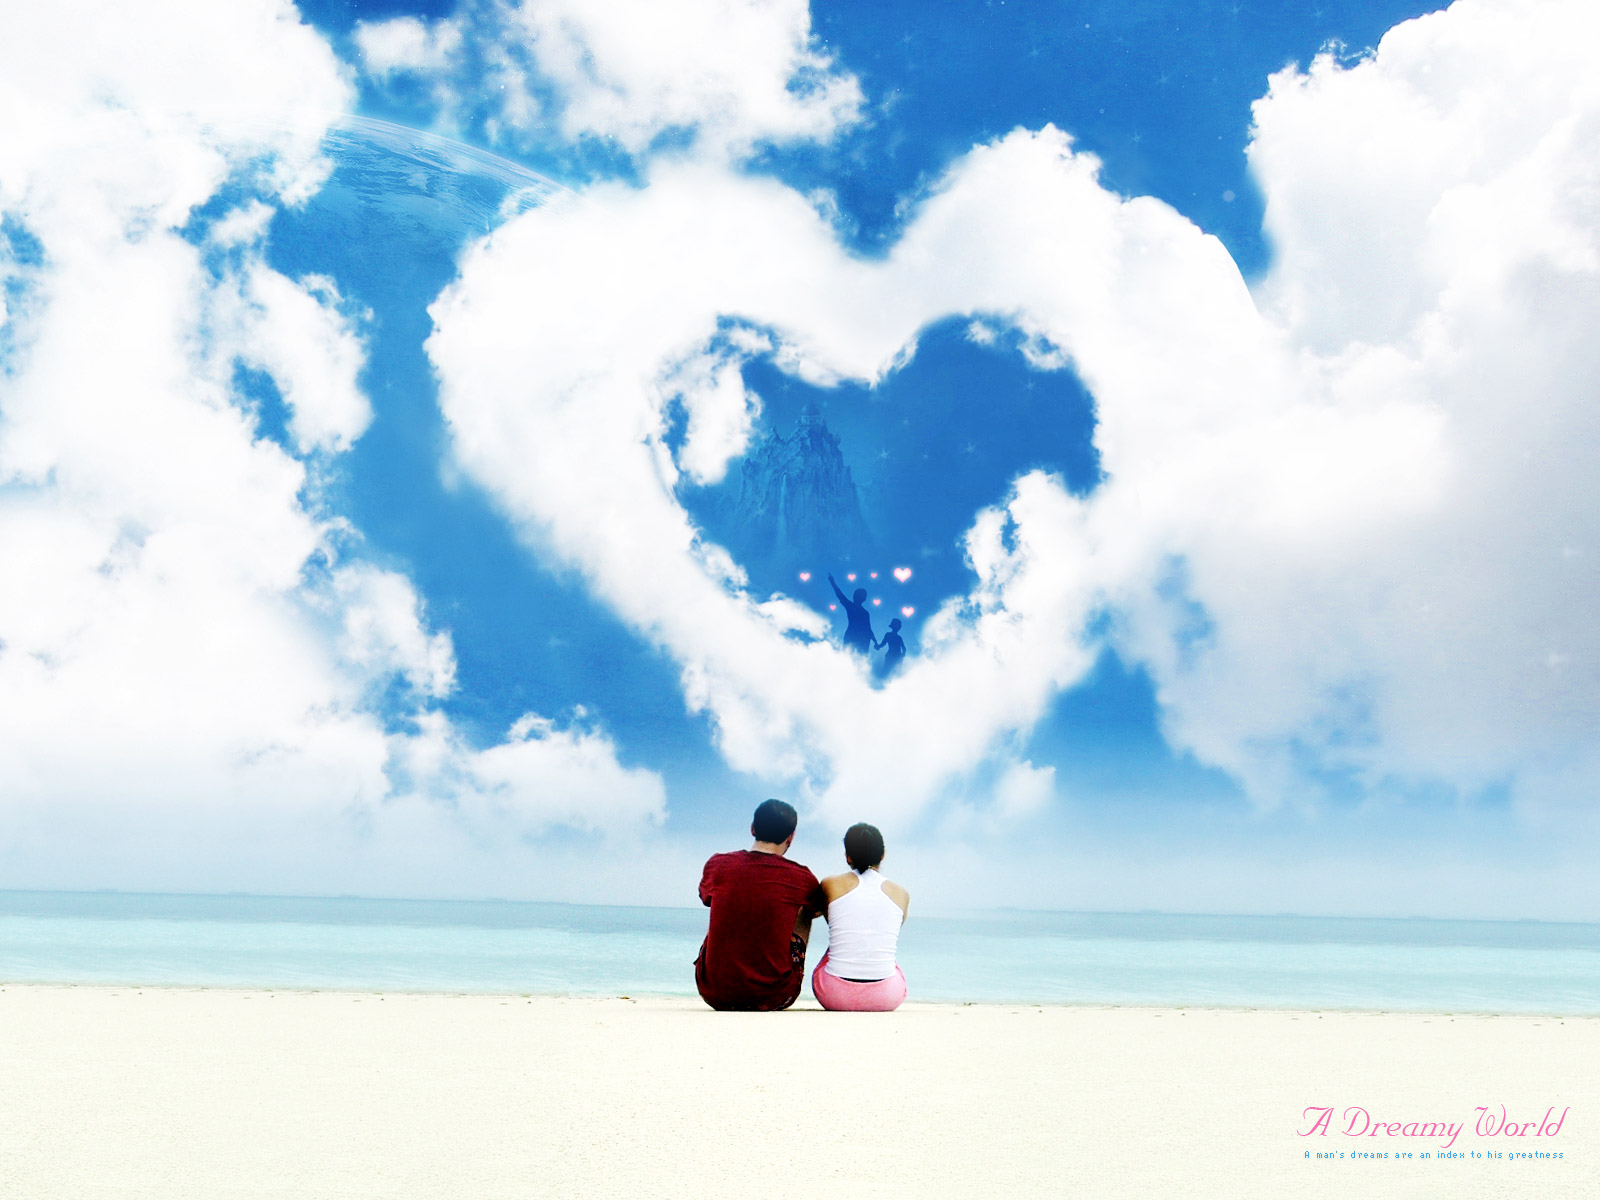 Lovers Dream World Wallpapers | HD Wallpapers